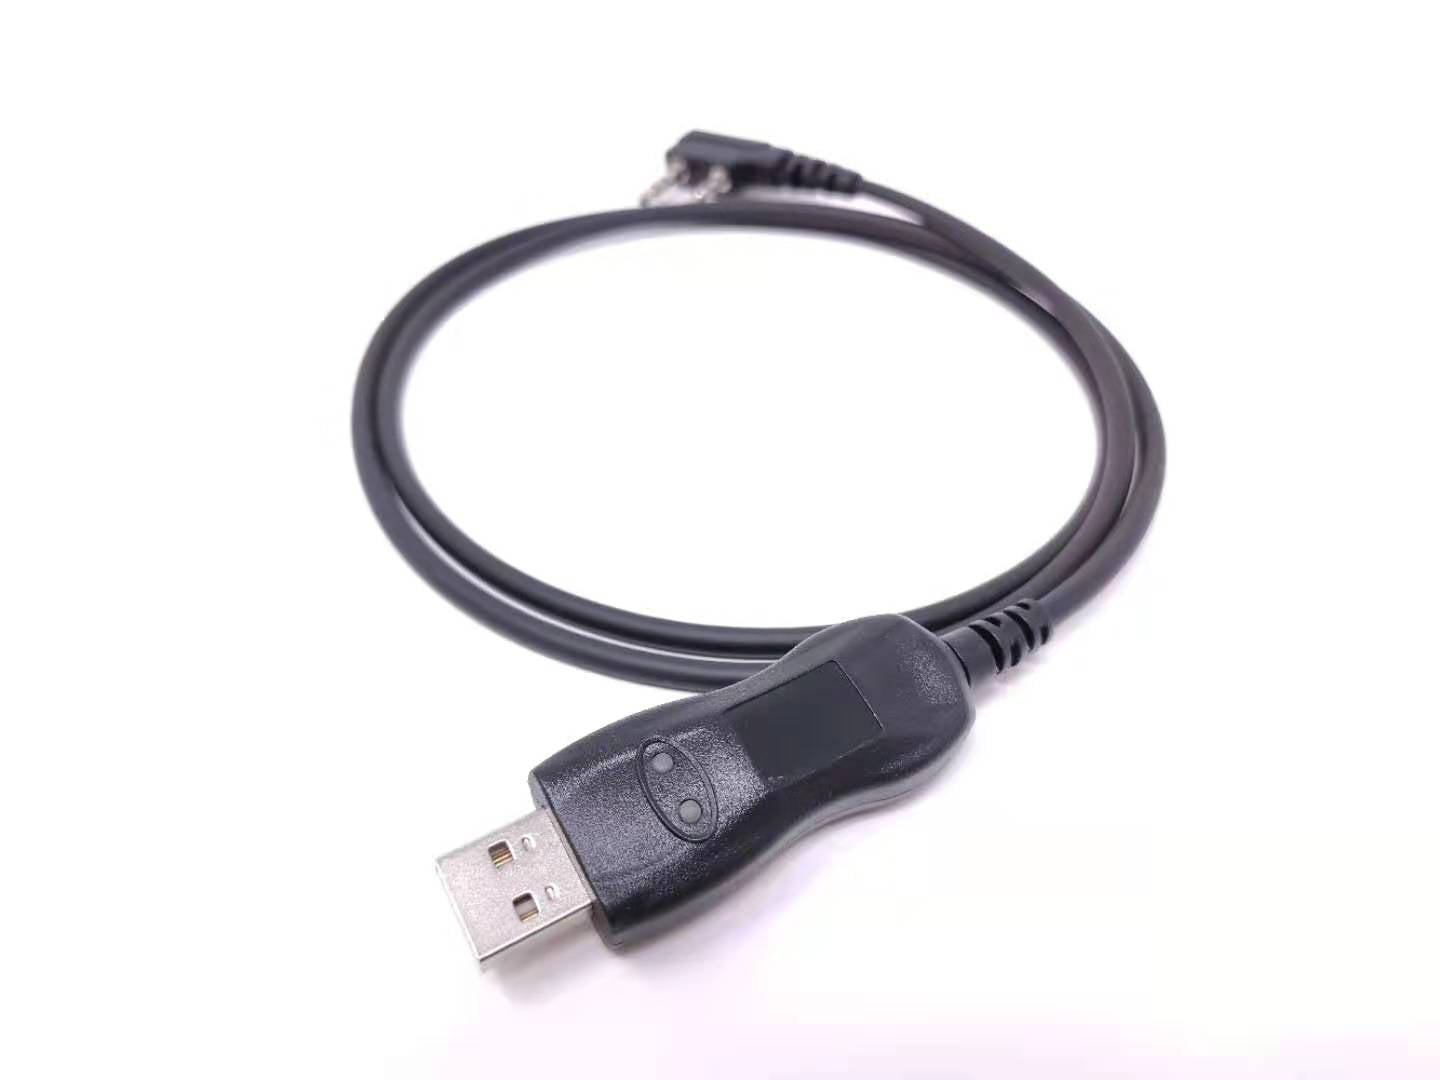 YDC TECH FTDI Genuine USB Programming Cable for BTECH, BaoFeng, Kenwood, and AnyTone Radio